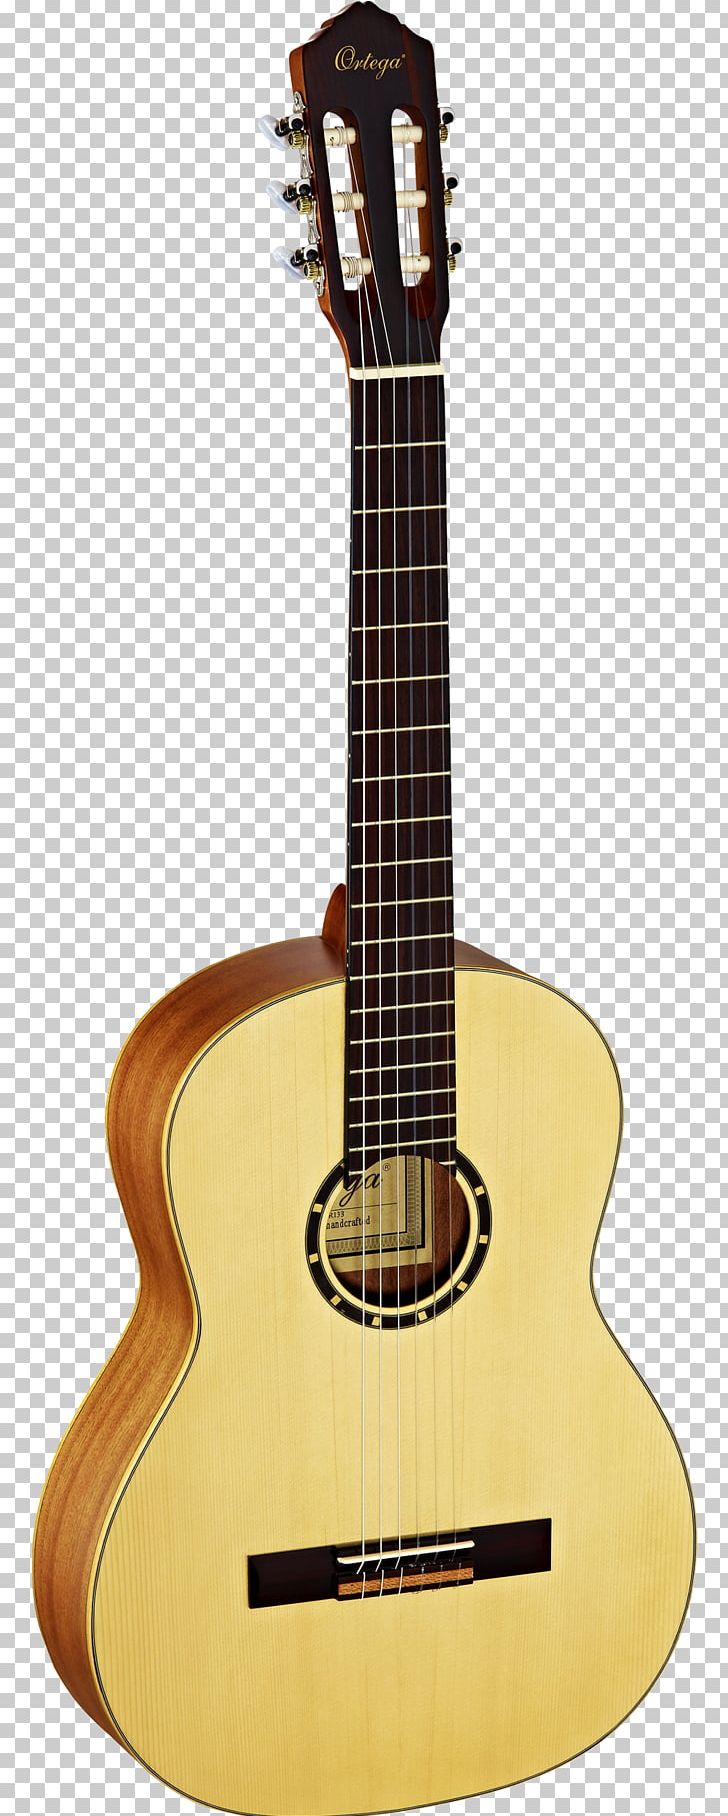 Ukulele Classical Guitar Steel-string Acoustic Guitar PNG, Clipart, Acoustic Electric Guitar, Amancio Ortega, Classical Guitar, Cuatro, Guitar Accessory Free PNG Download